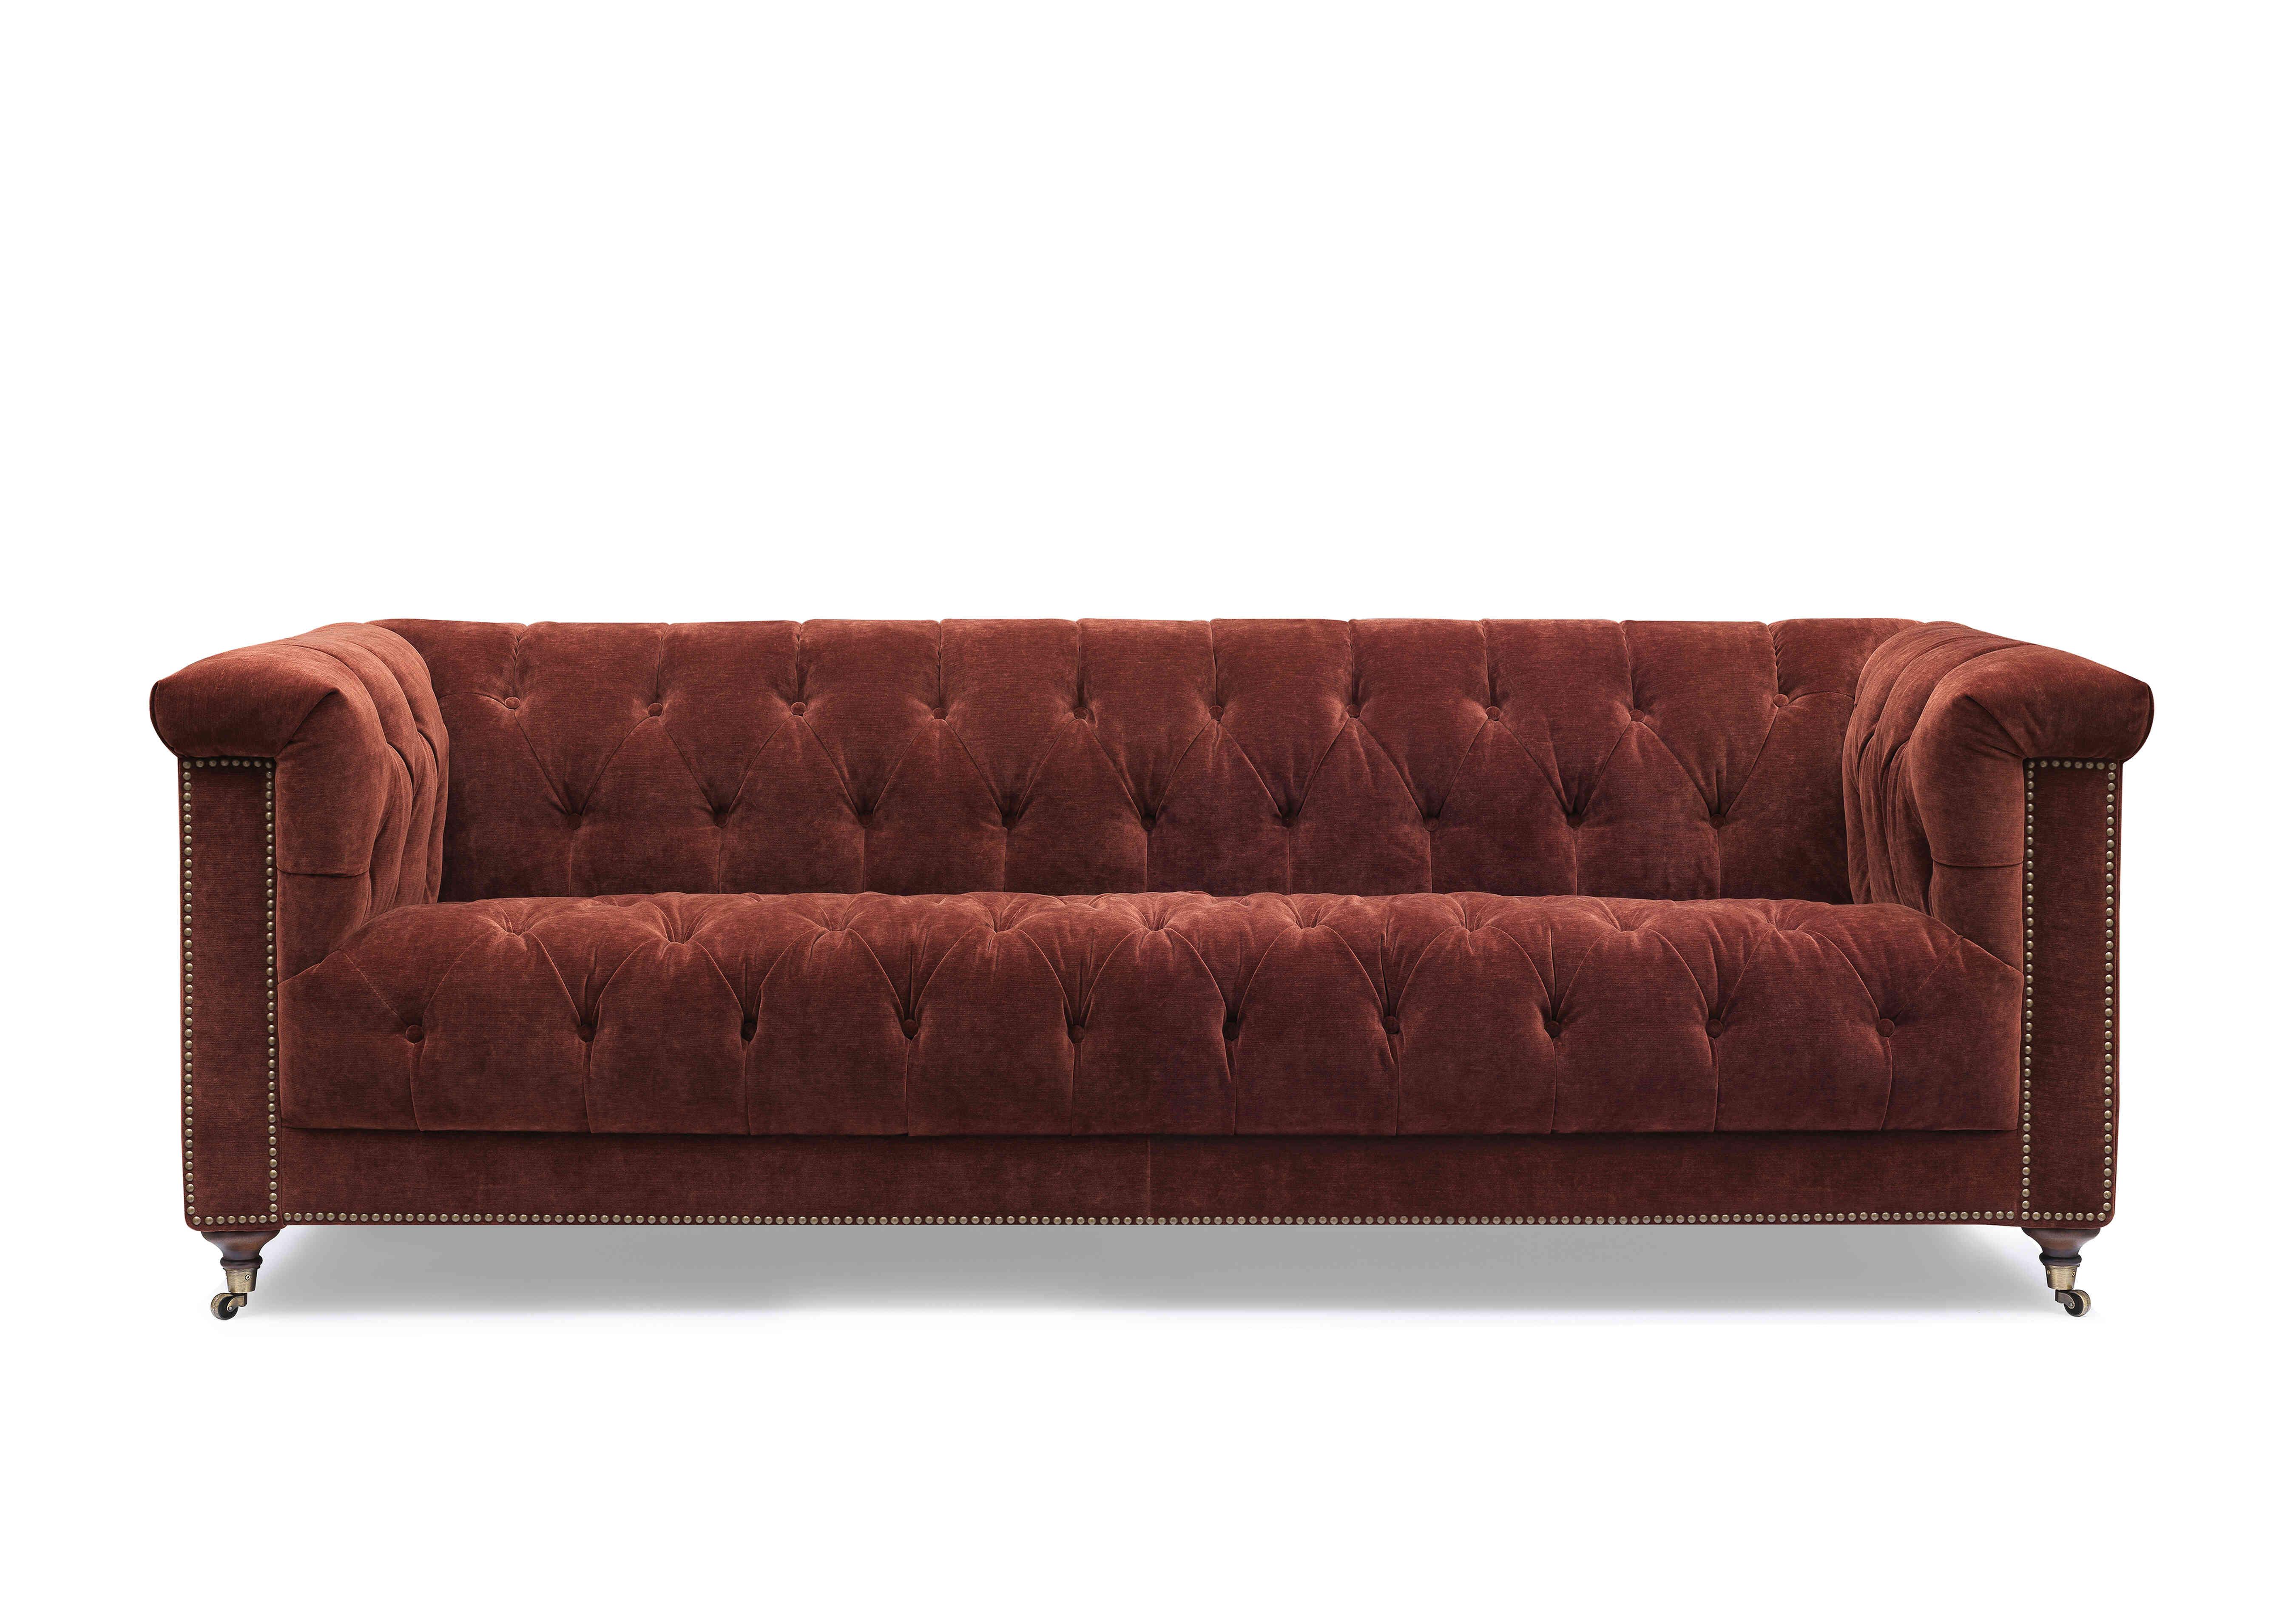 Wallace 4 Seater Fabric Chesterfield Sofa with USB-C in X3y1-W019 Tawny on Furniture Village